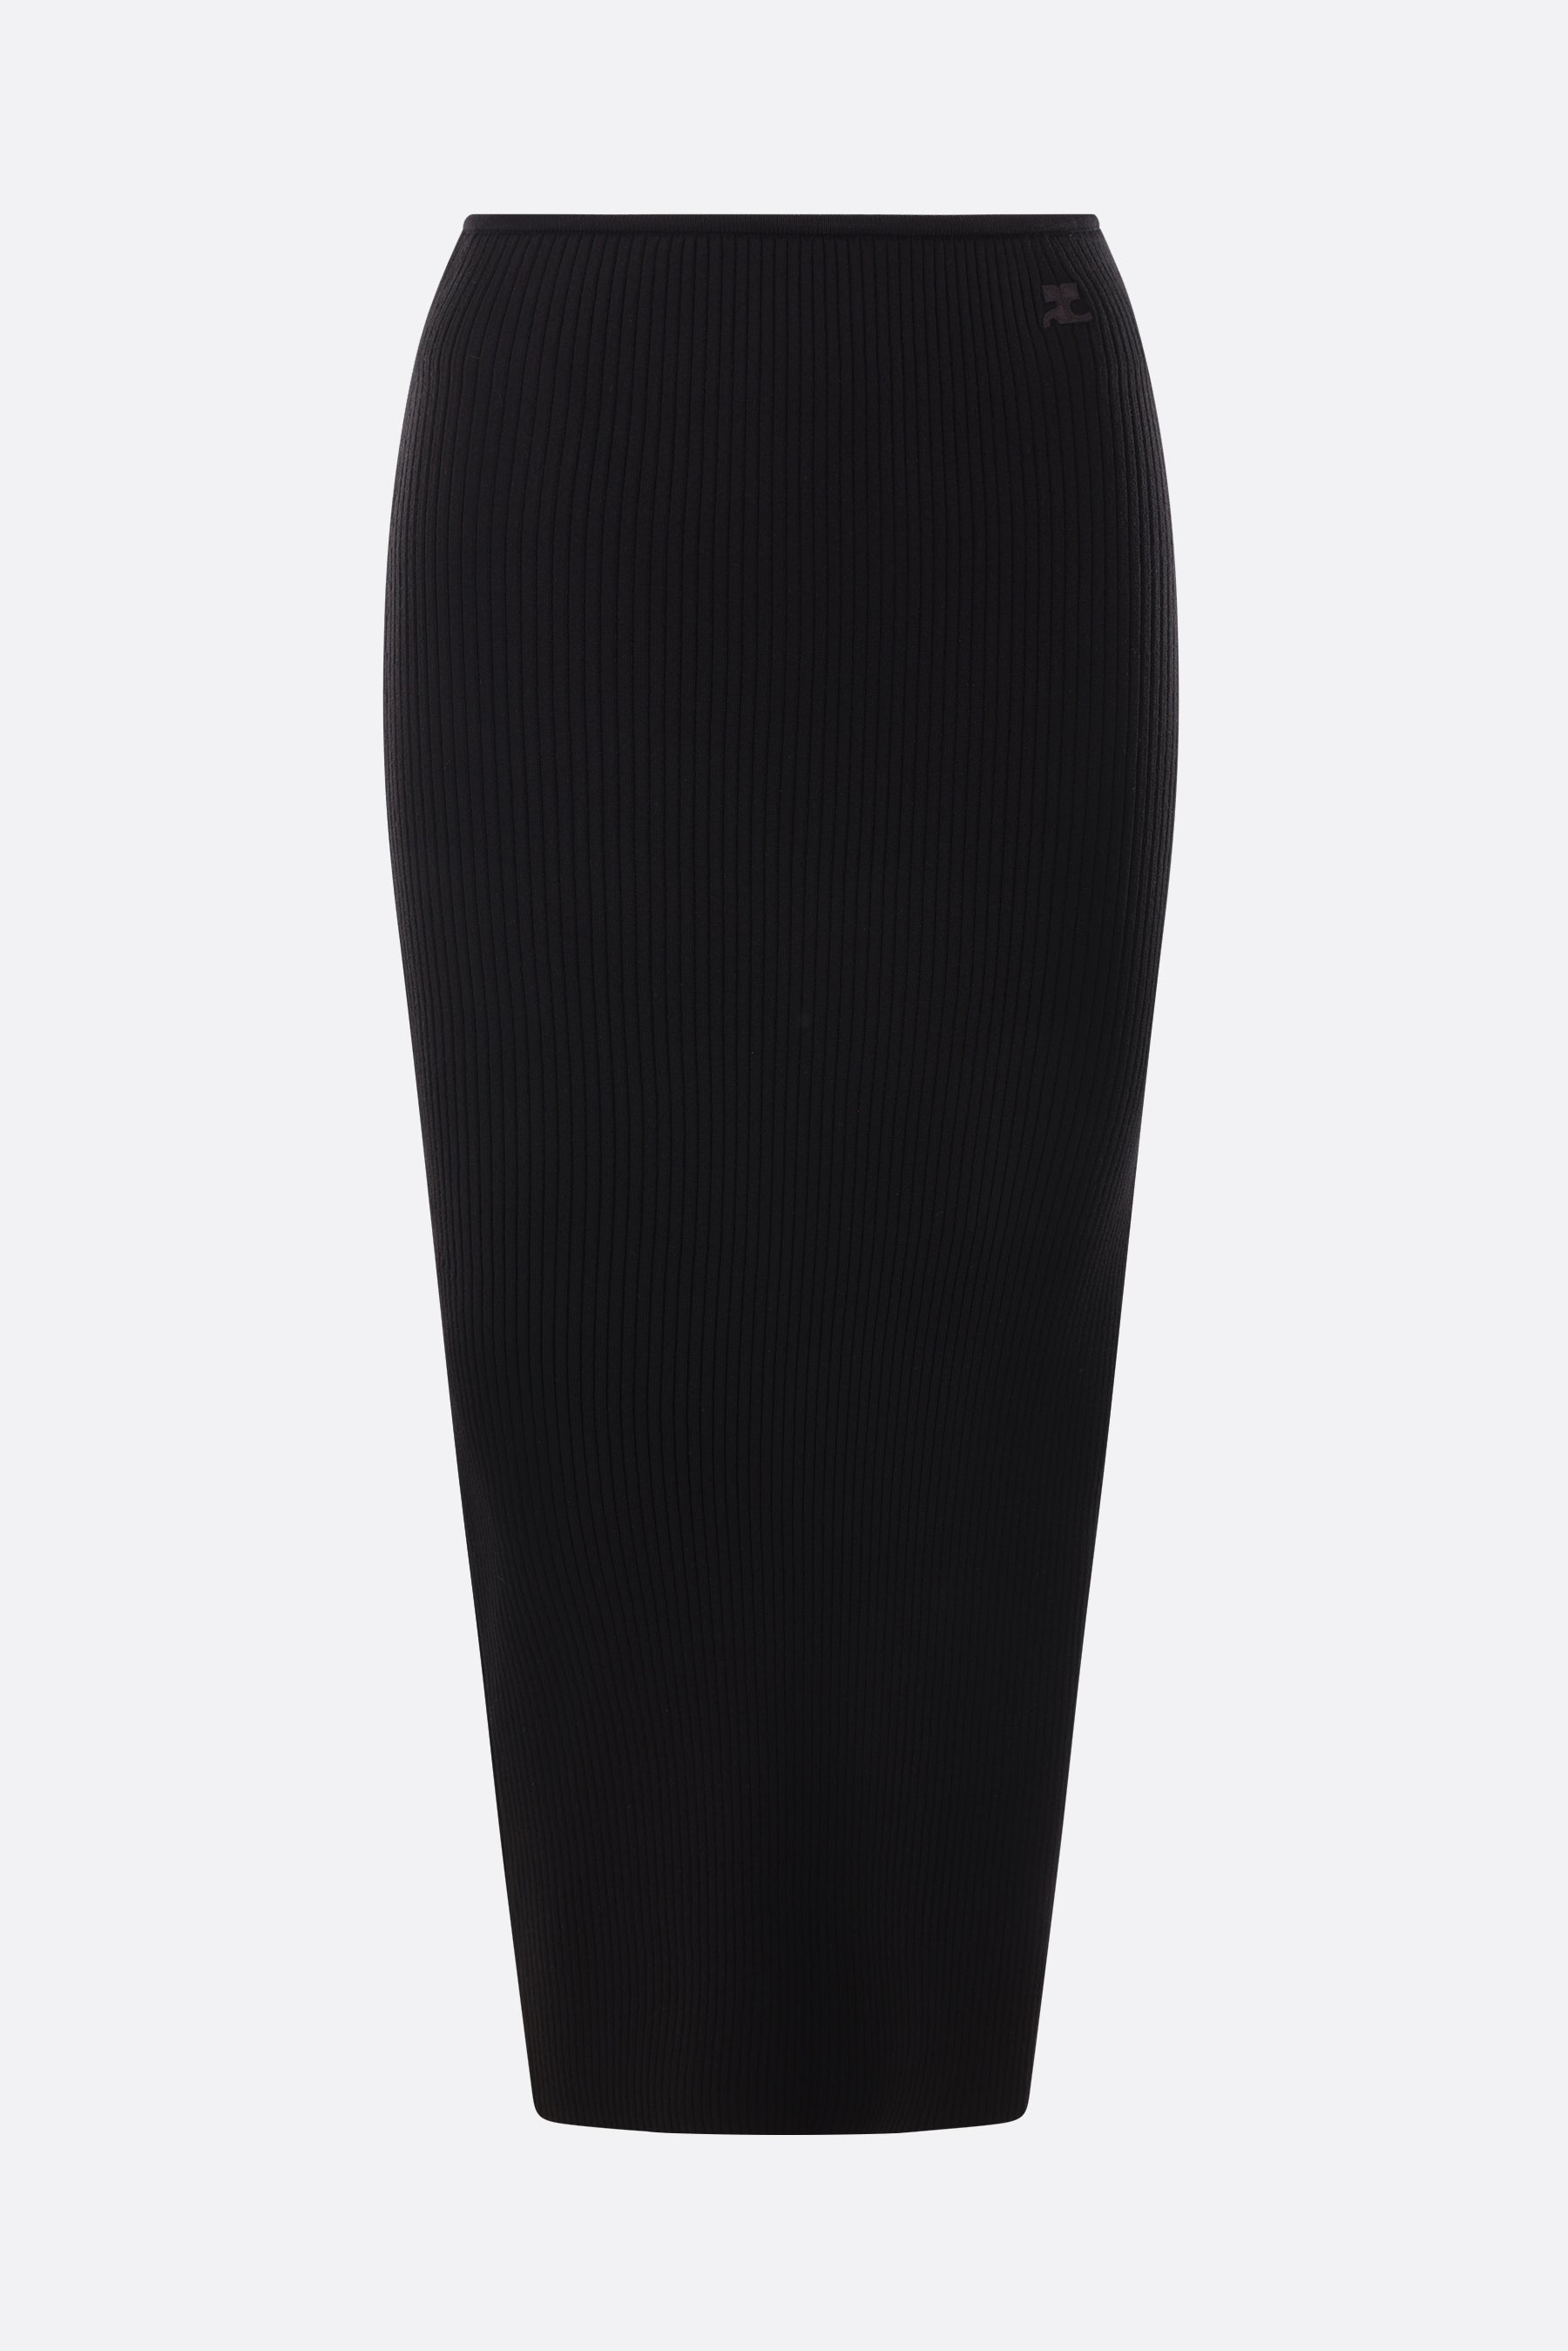 ribbed knit pencil skirt with slit